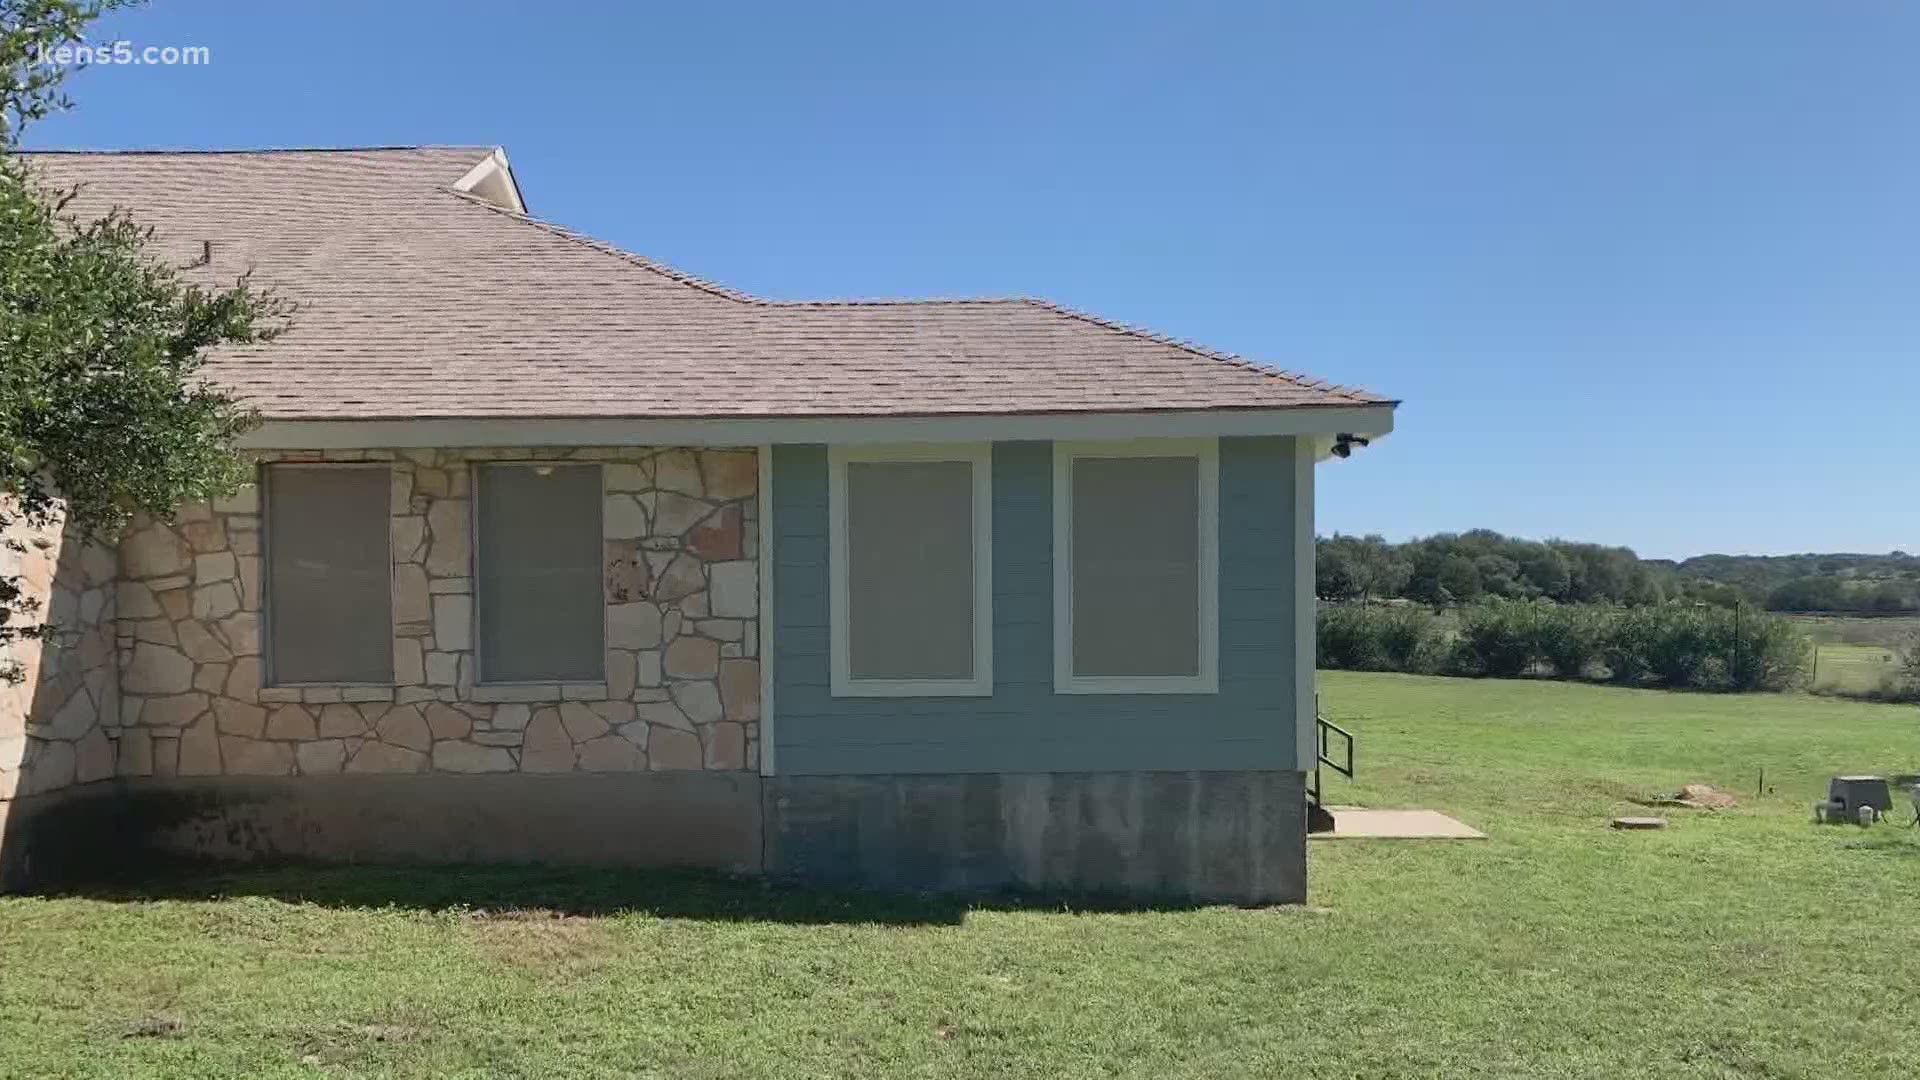 A local philanthropist's $500,000 donation went towards renovating a home for foster teens in Texas.